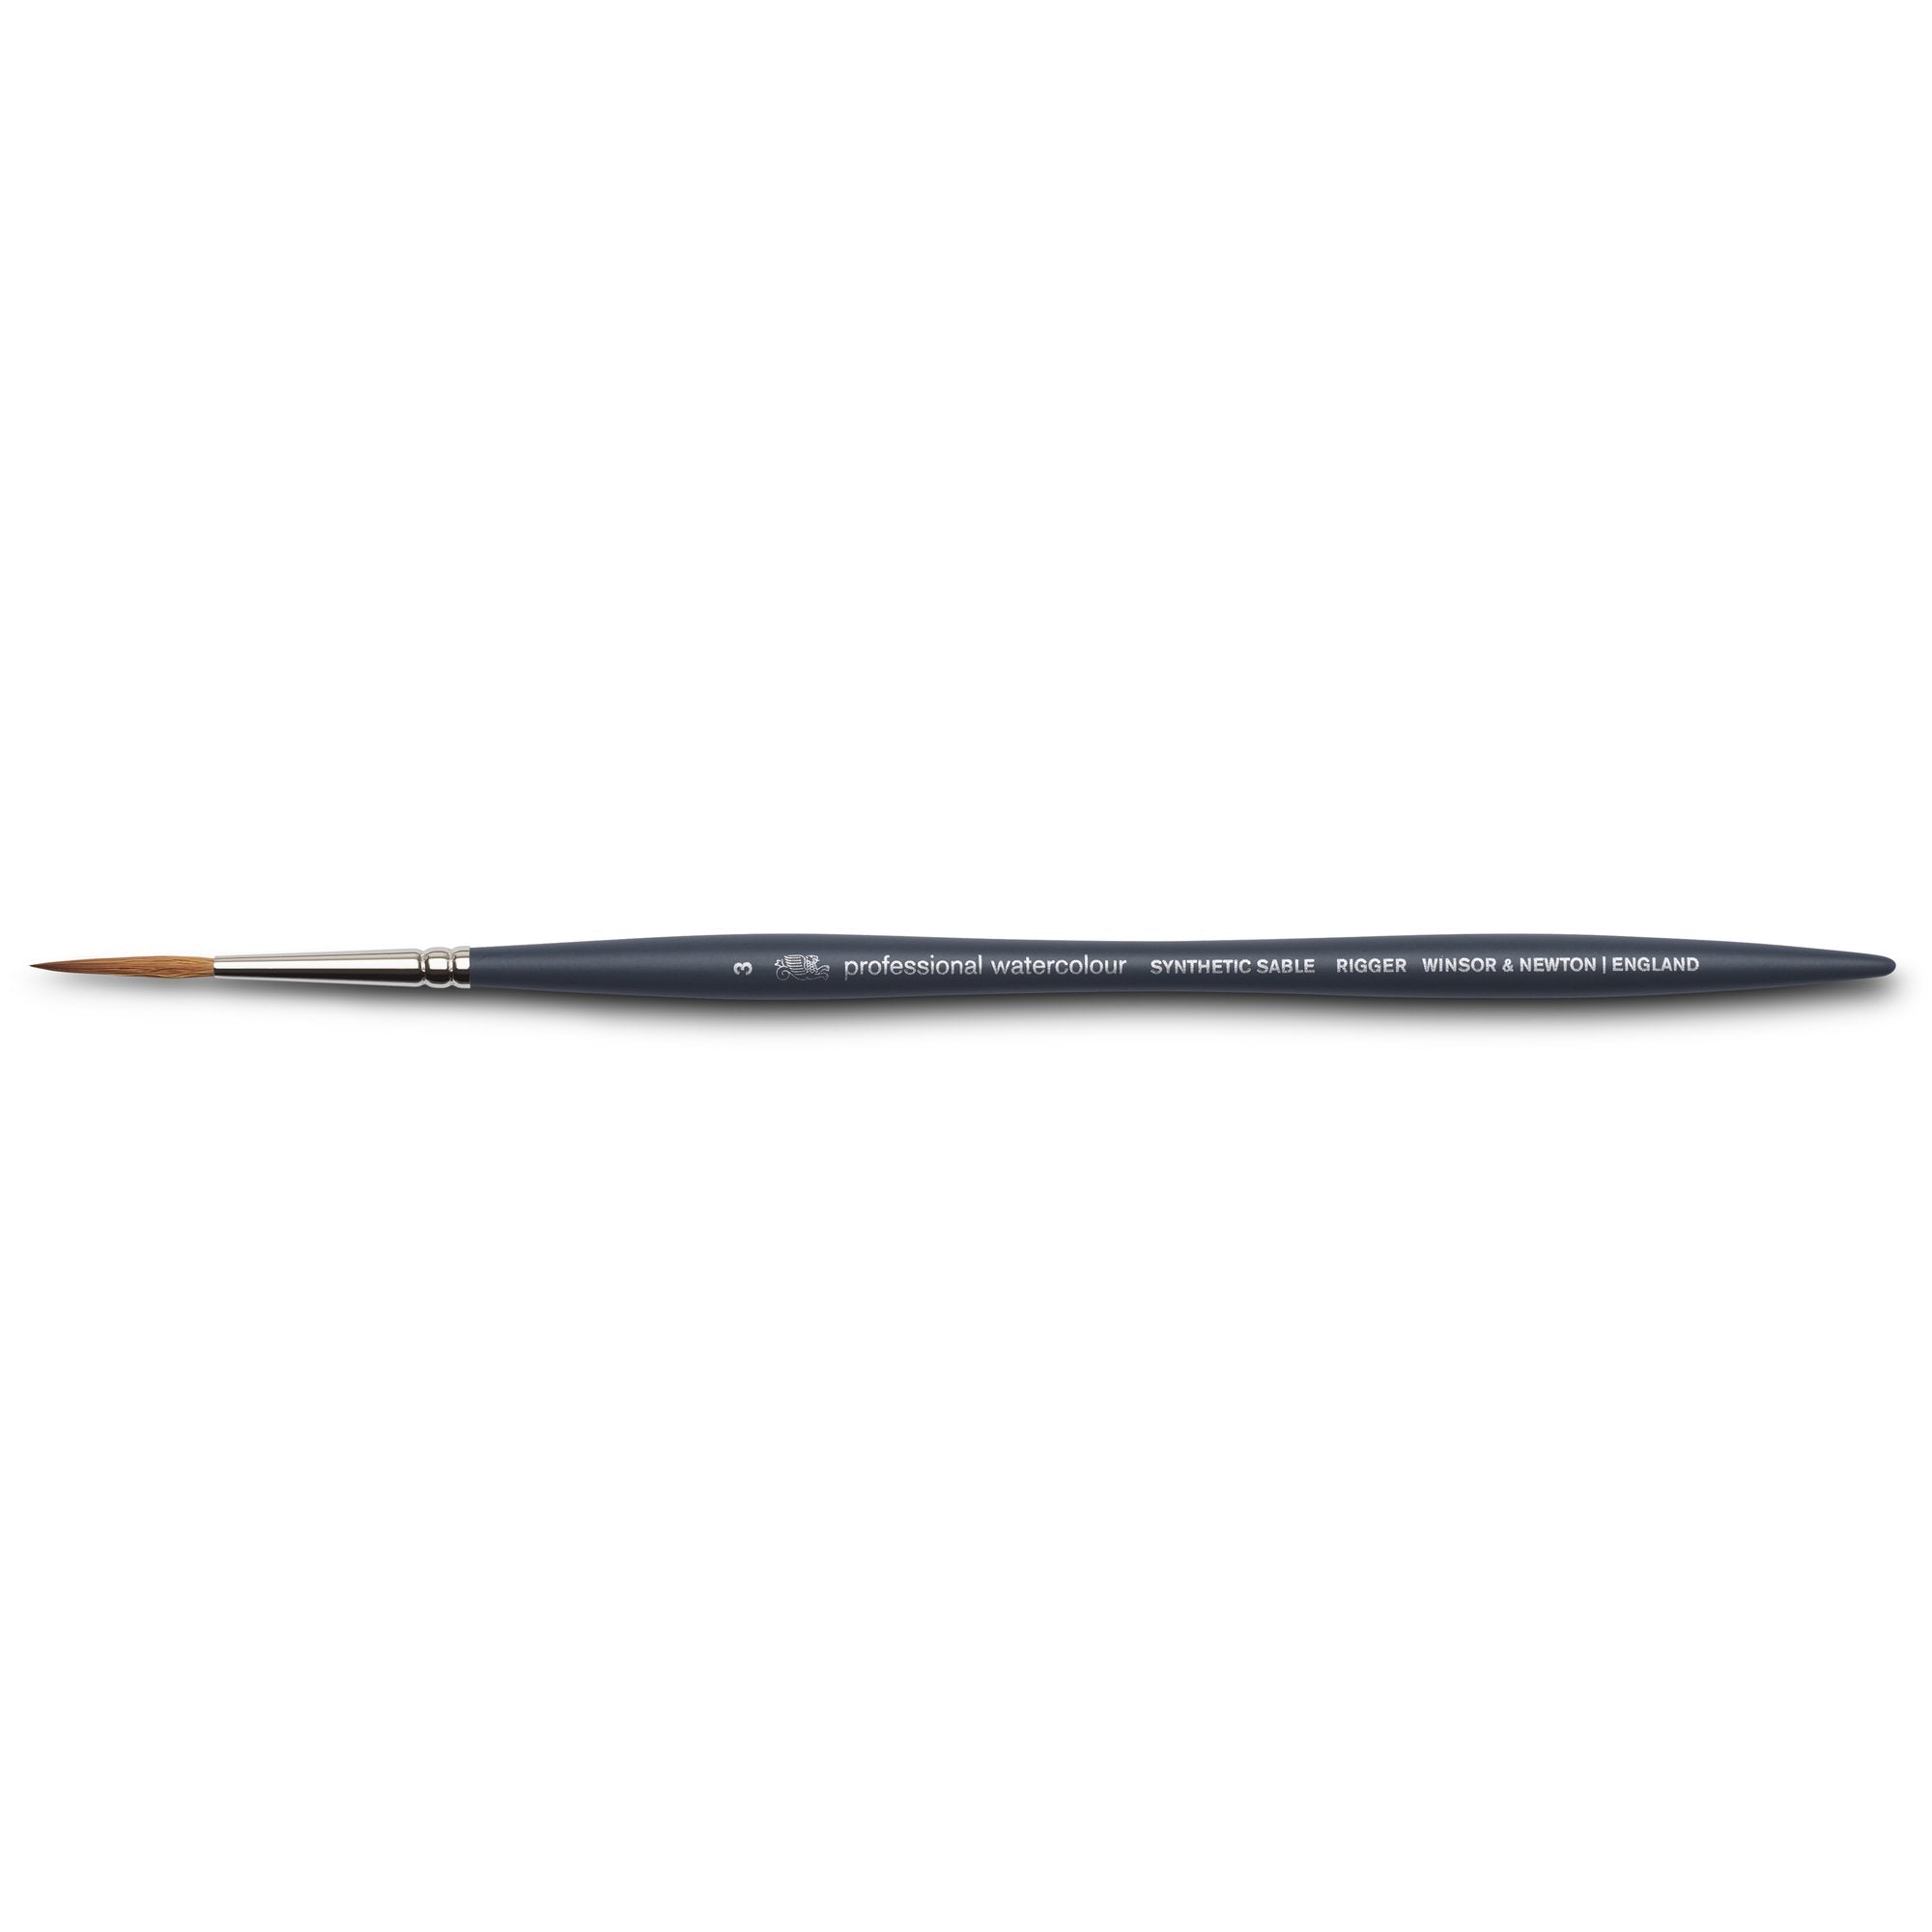 Winsor & Newton Professional Watercolour Synthetic Sable Brush Rigger 3